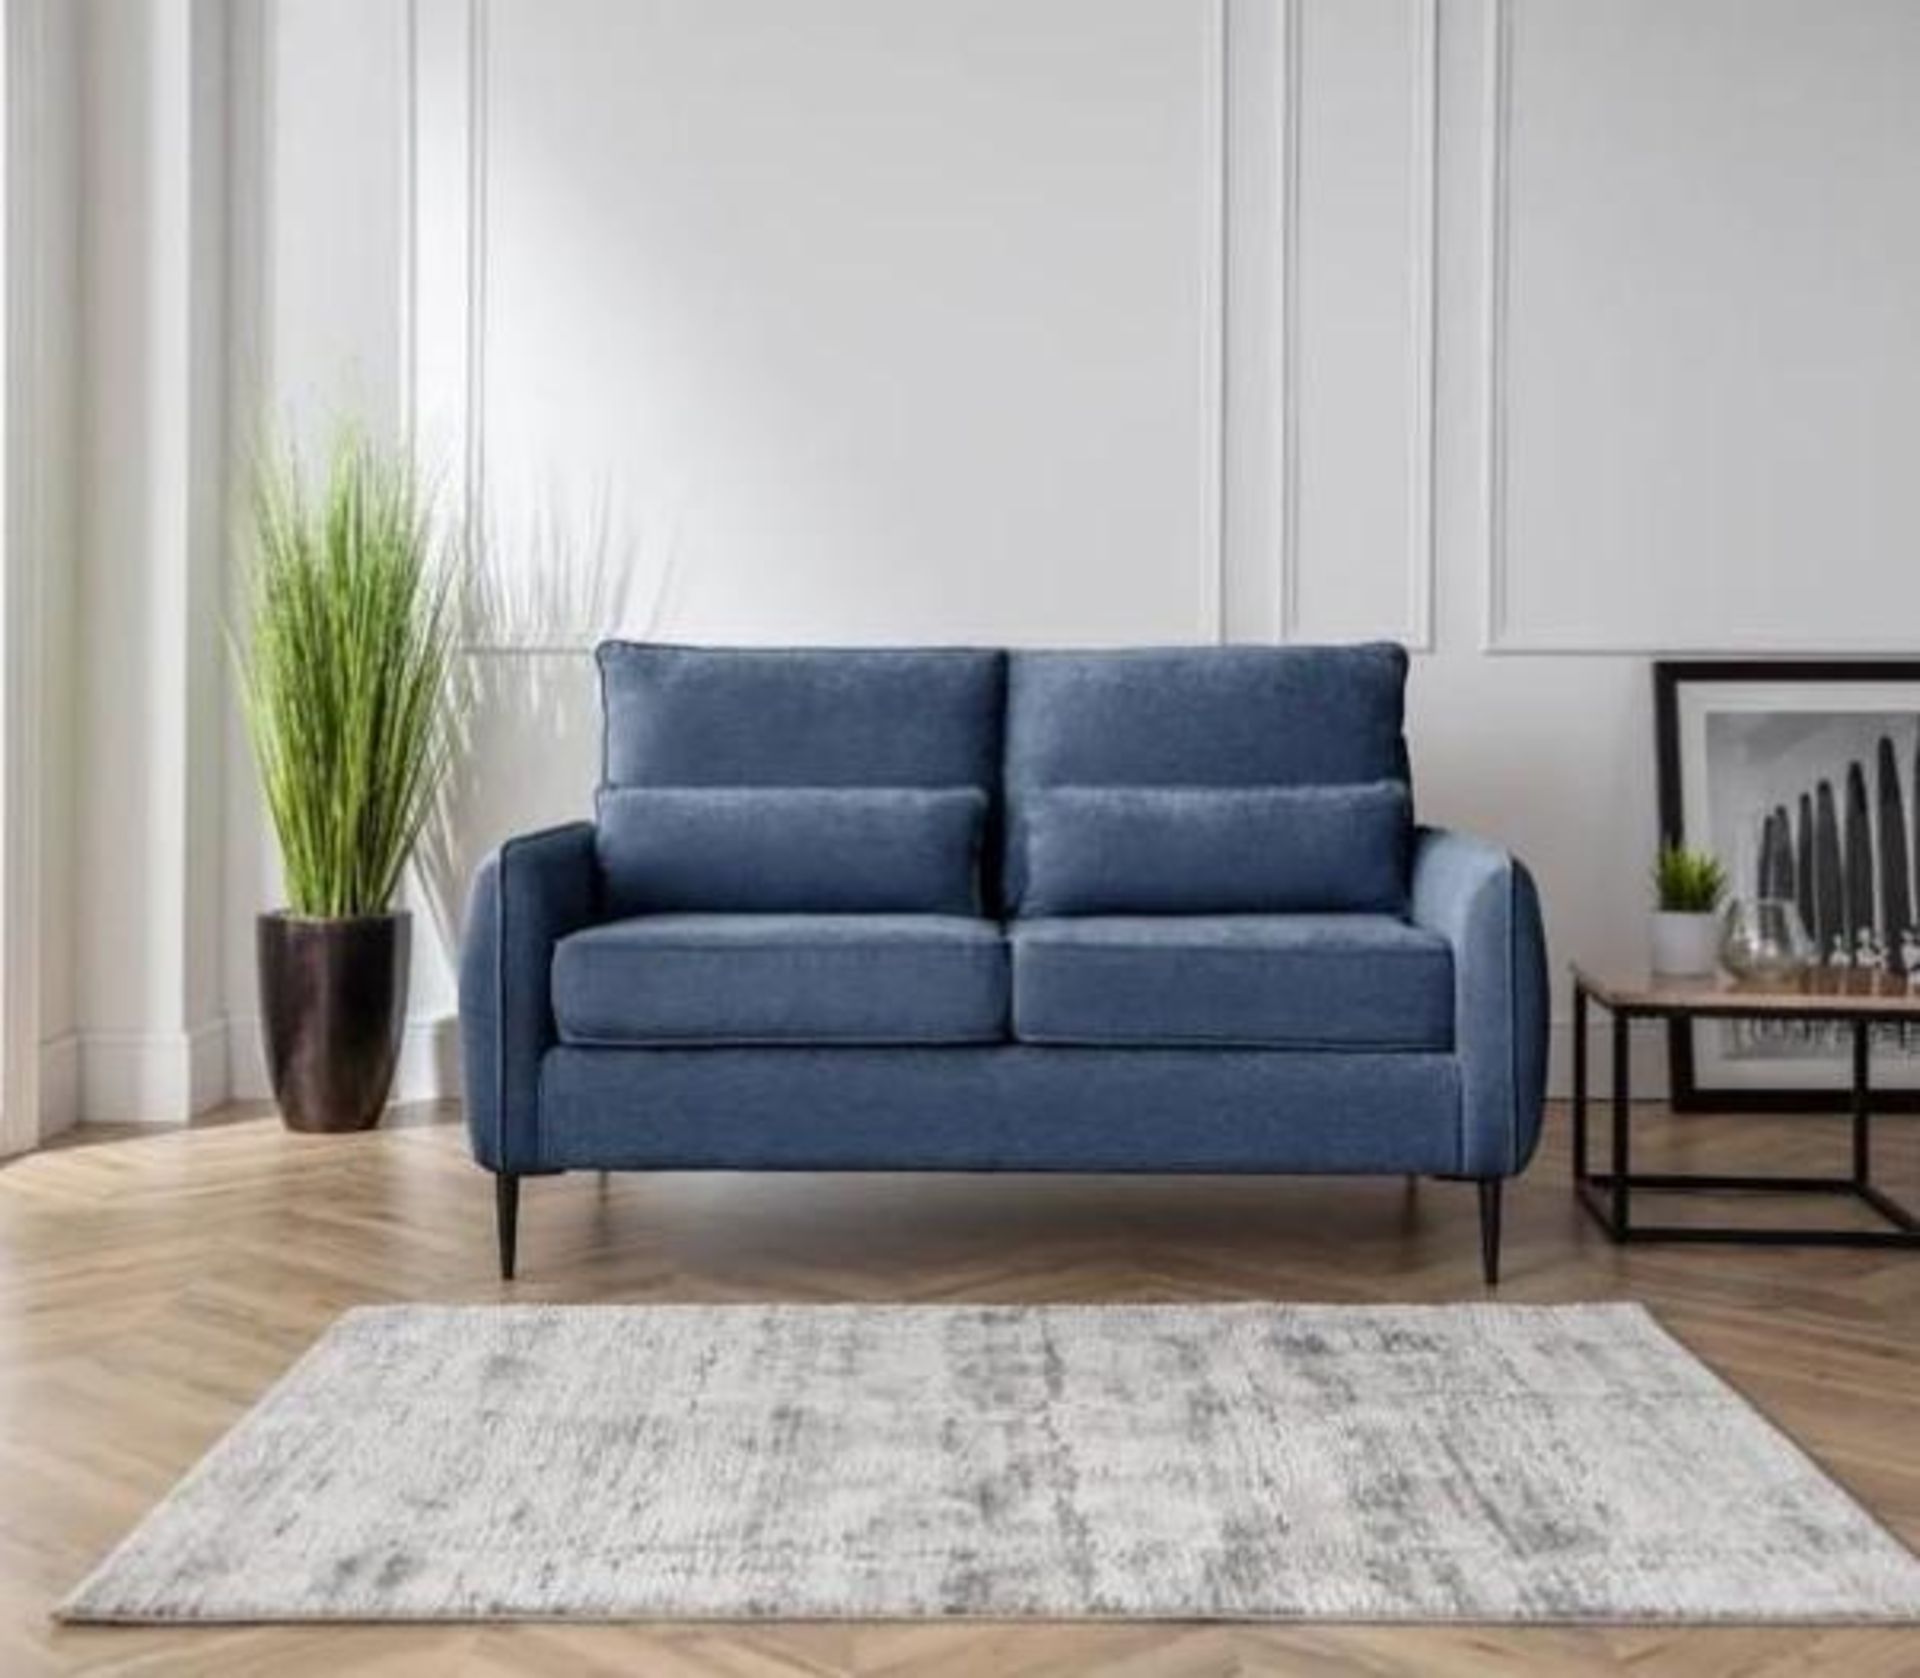 *TRADE LOT* 8 X Brand new Boxed 2 Seater Rhonda Sofa in Navy